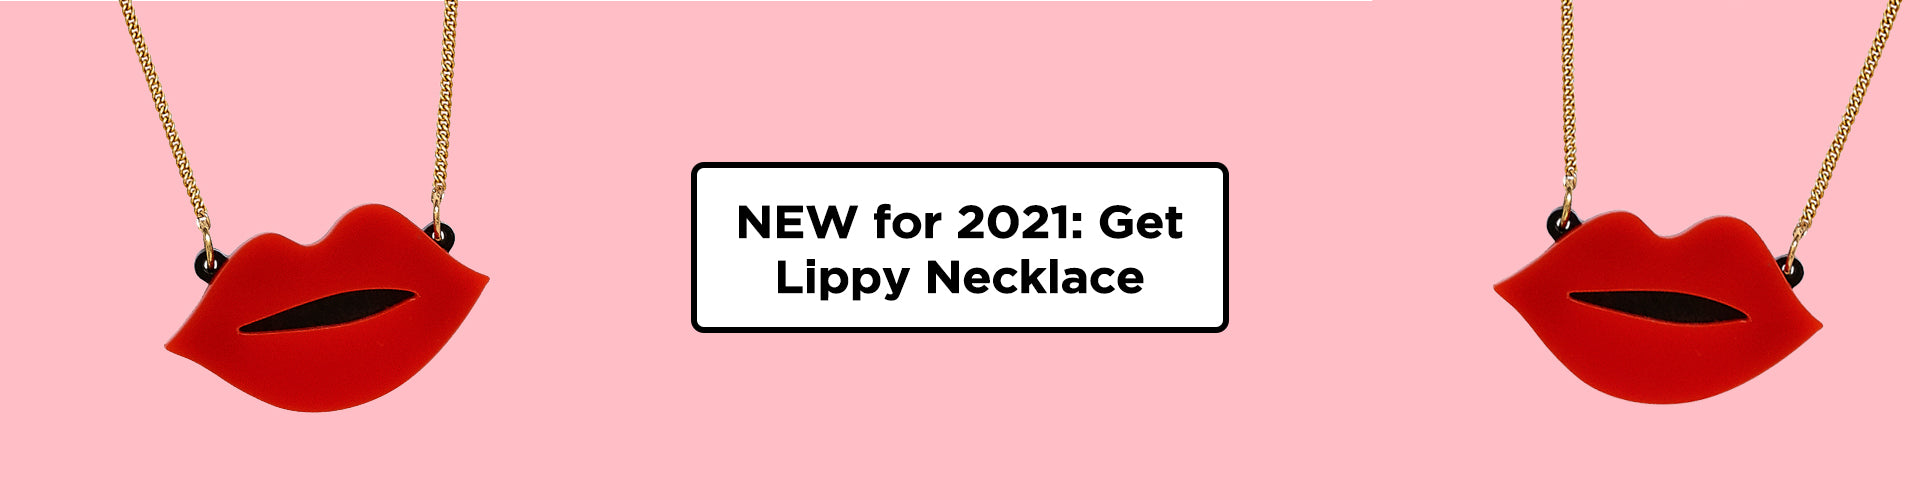 NEW exclusive Get Lippy Necklace for The Eve Appeal